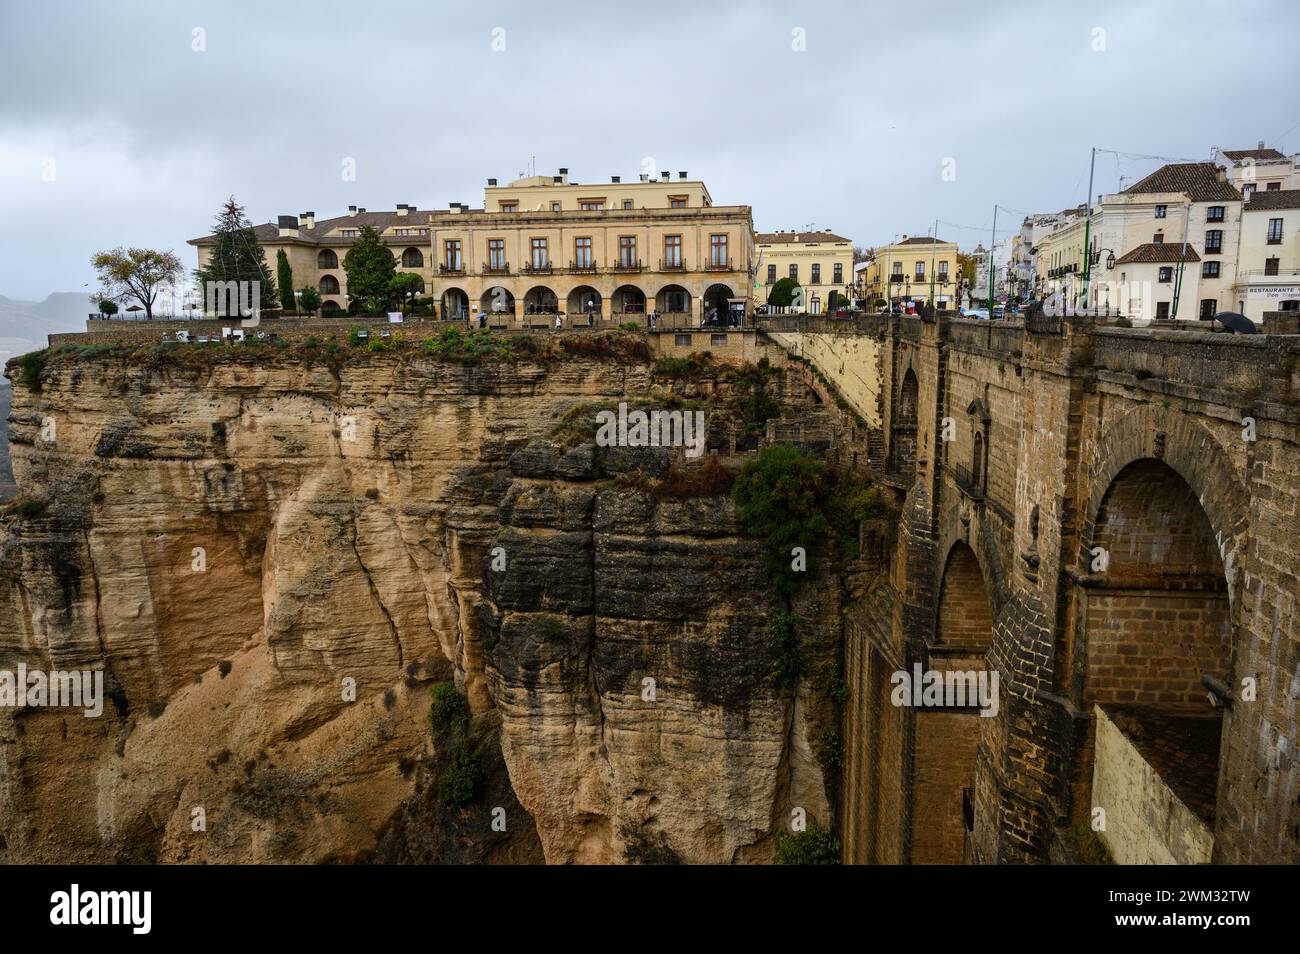 The Puente Nuevo and the old town of Ronda, Malaga, Andalucia, Spain. Stock Photo